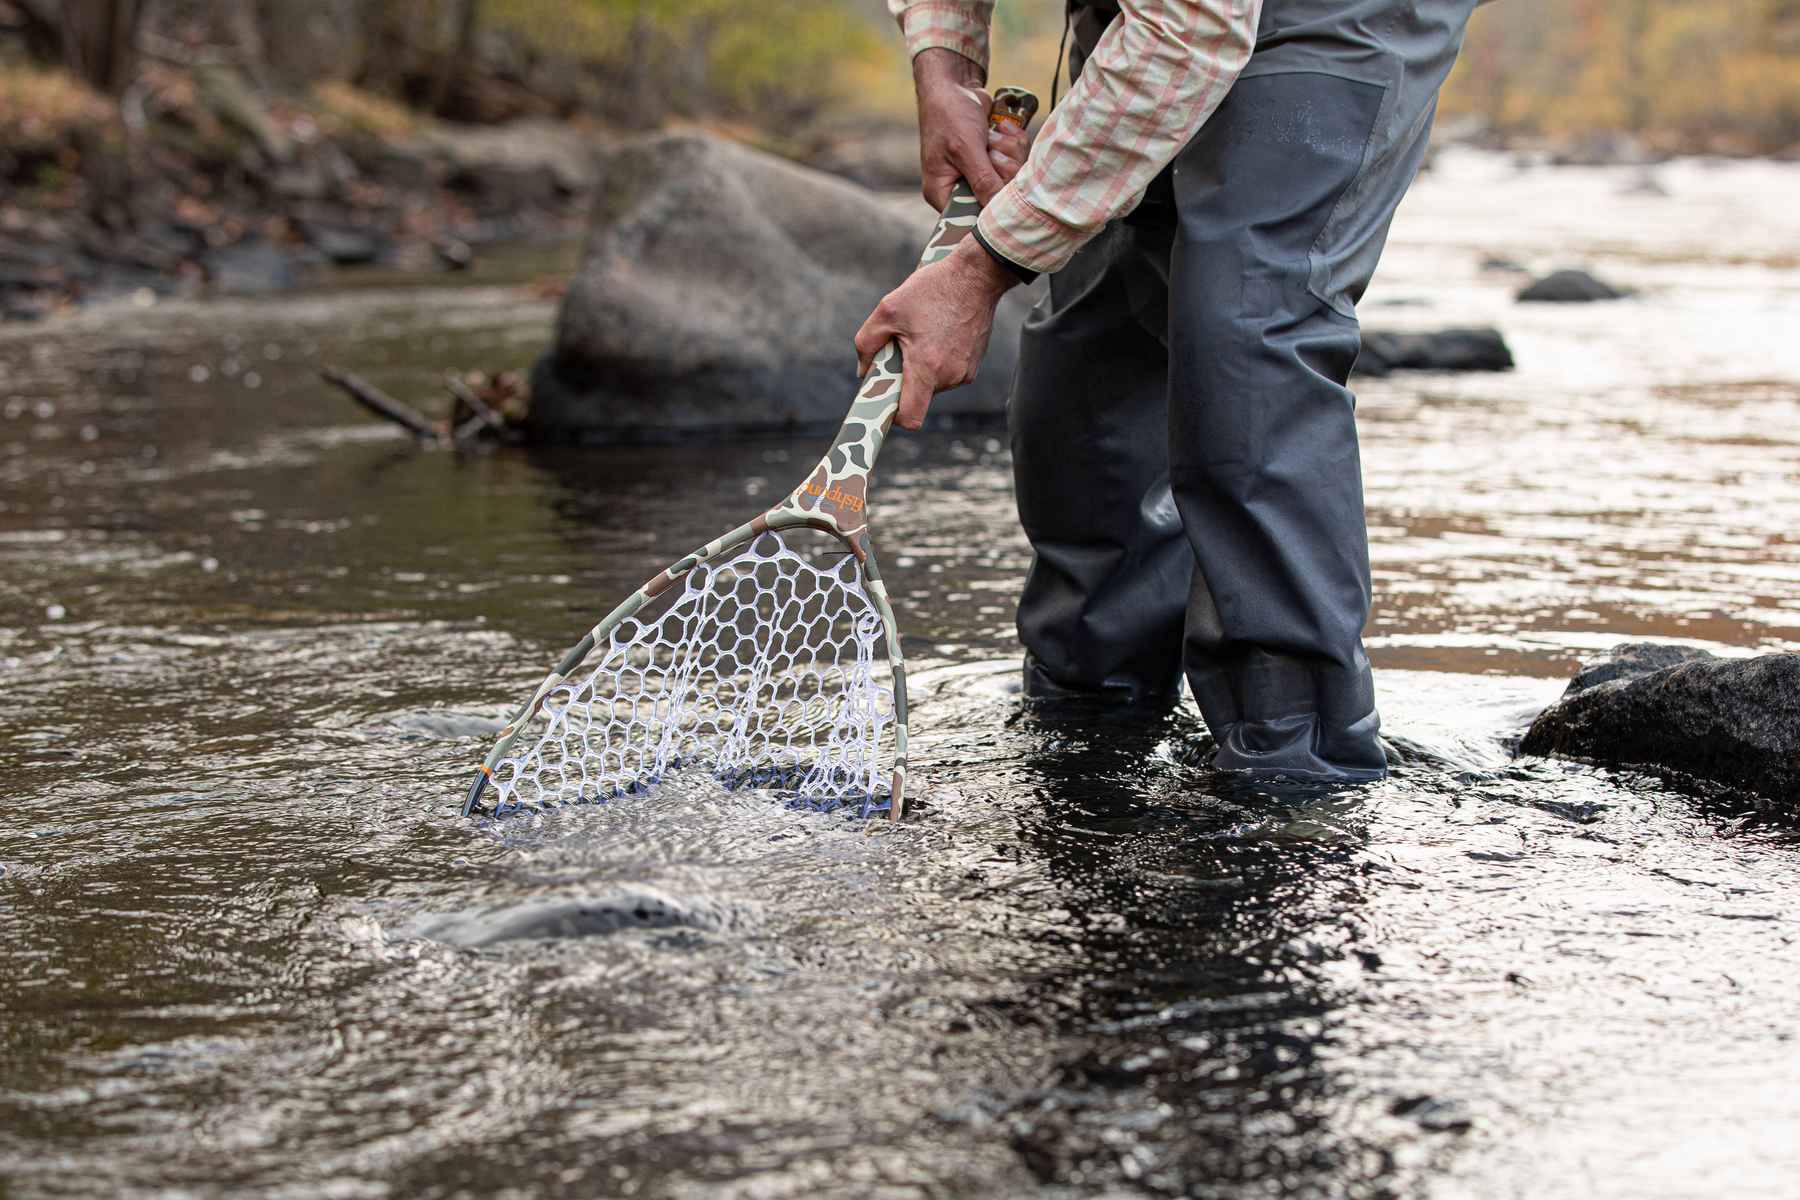 Wading Waters Fly Fishing - LUNKER NET They arrived. The USA